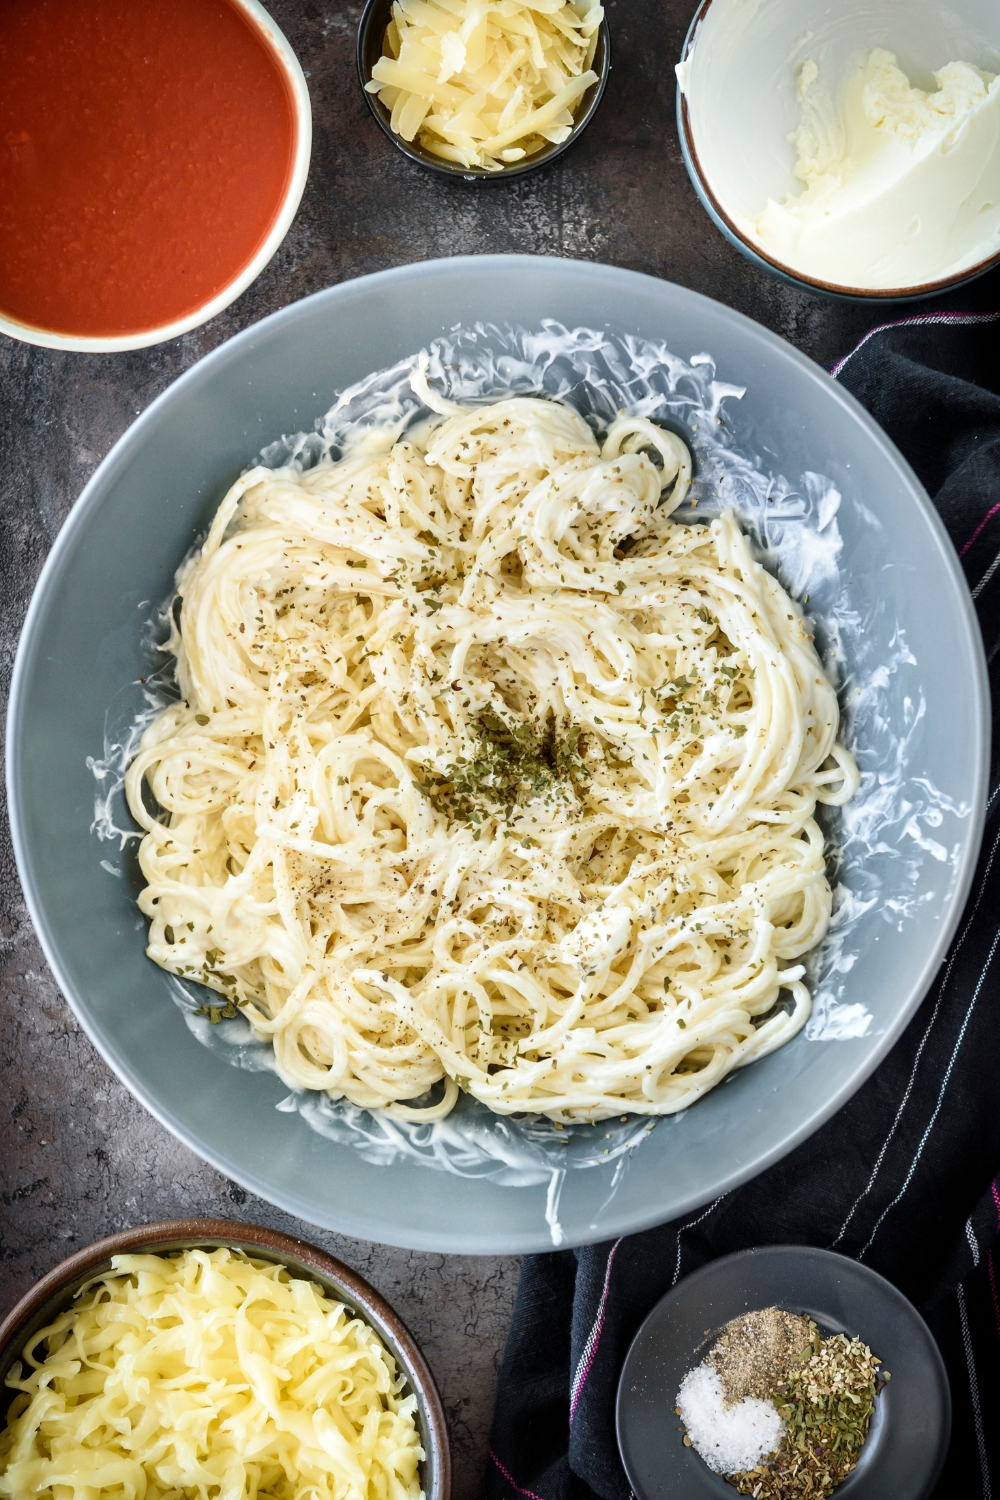 A bowl filled with cooked spaghetti noodles covered in a creamy sauce with a pile of seasonings in the center of the spaghetti.